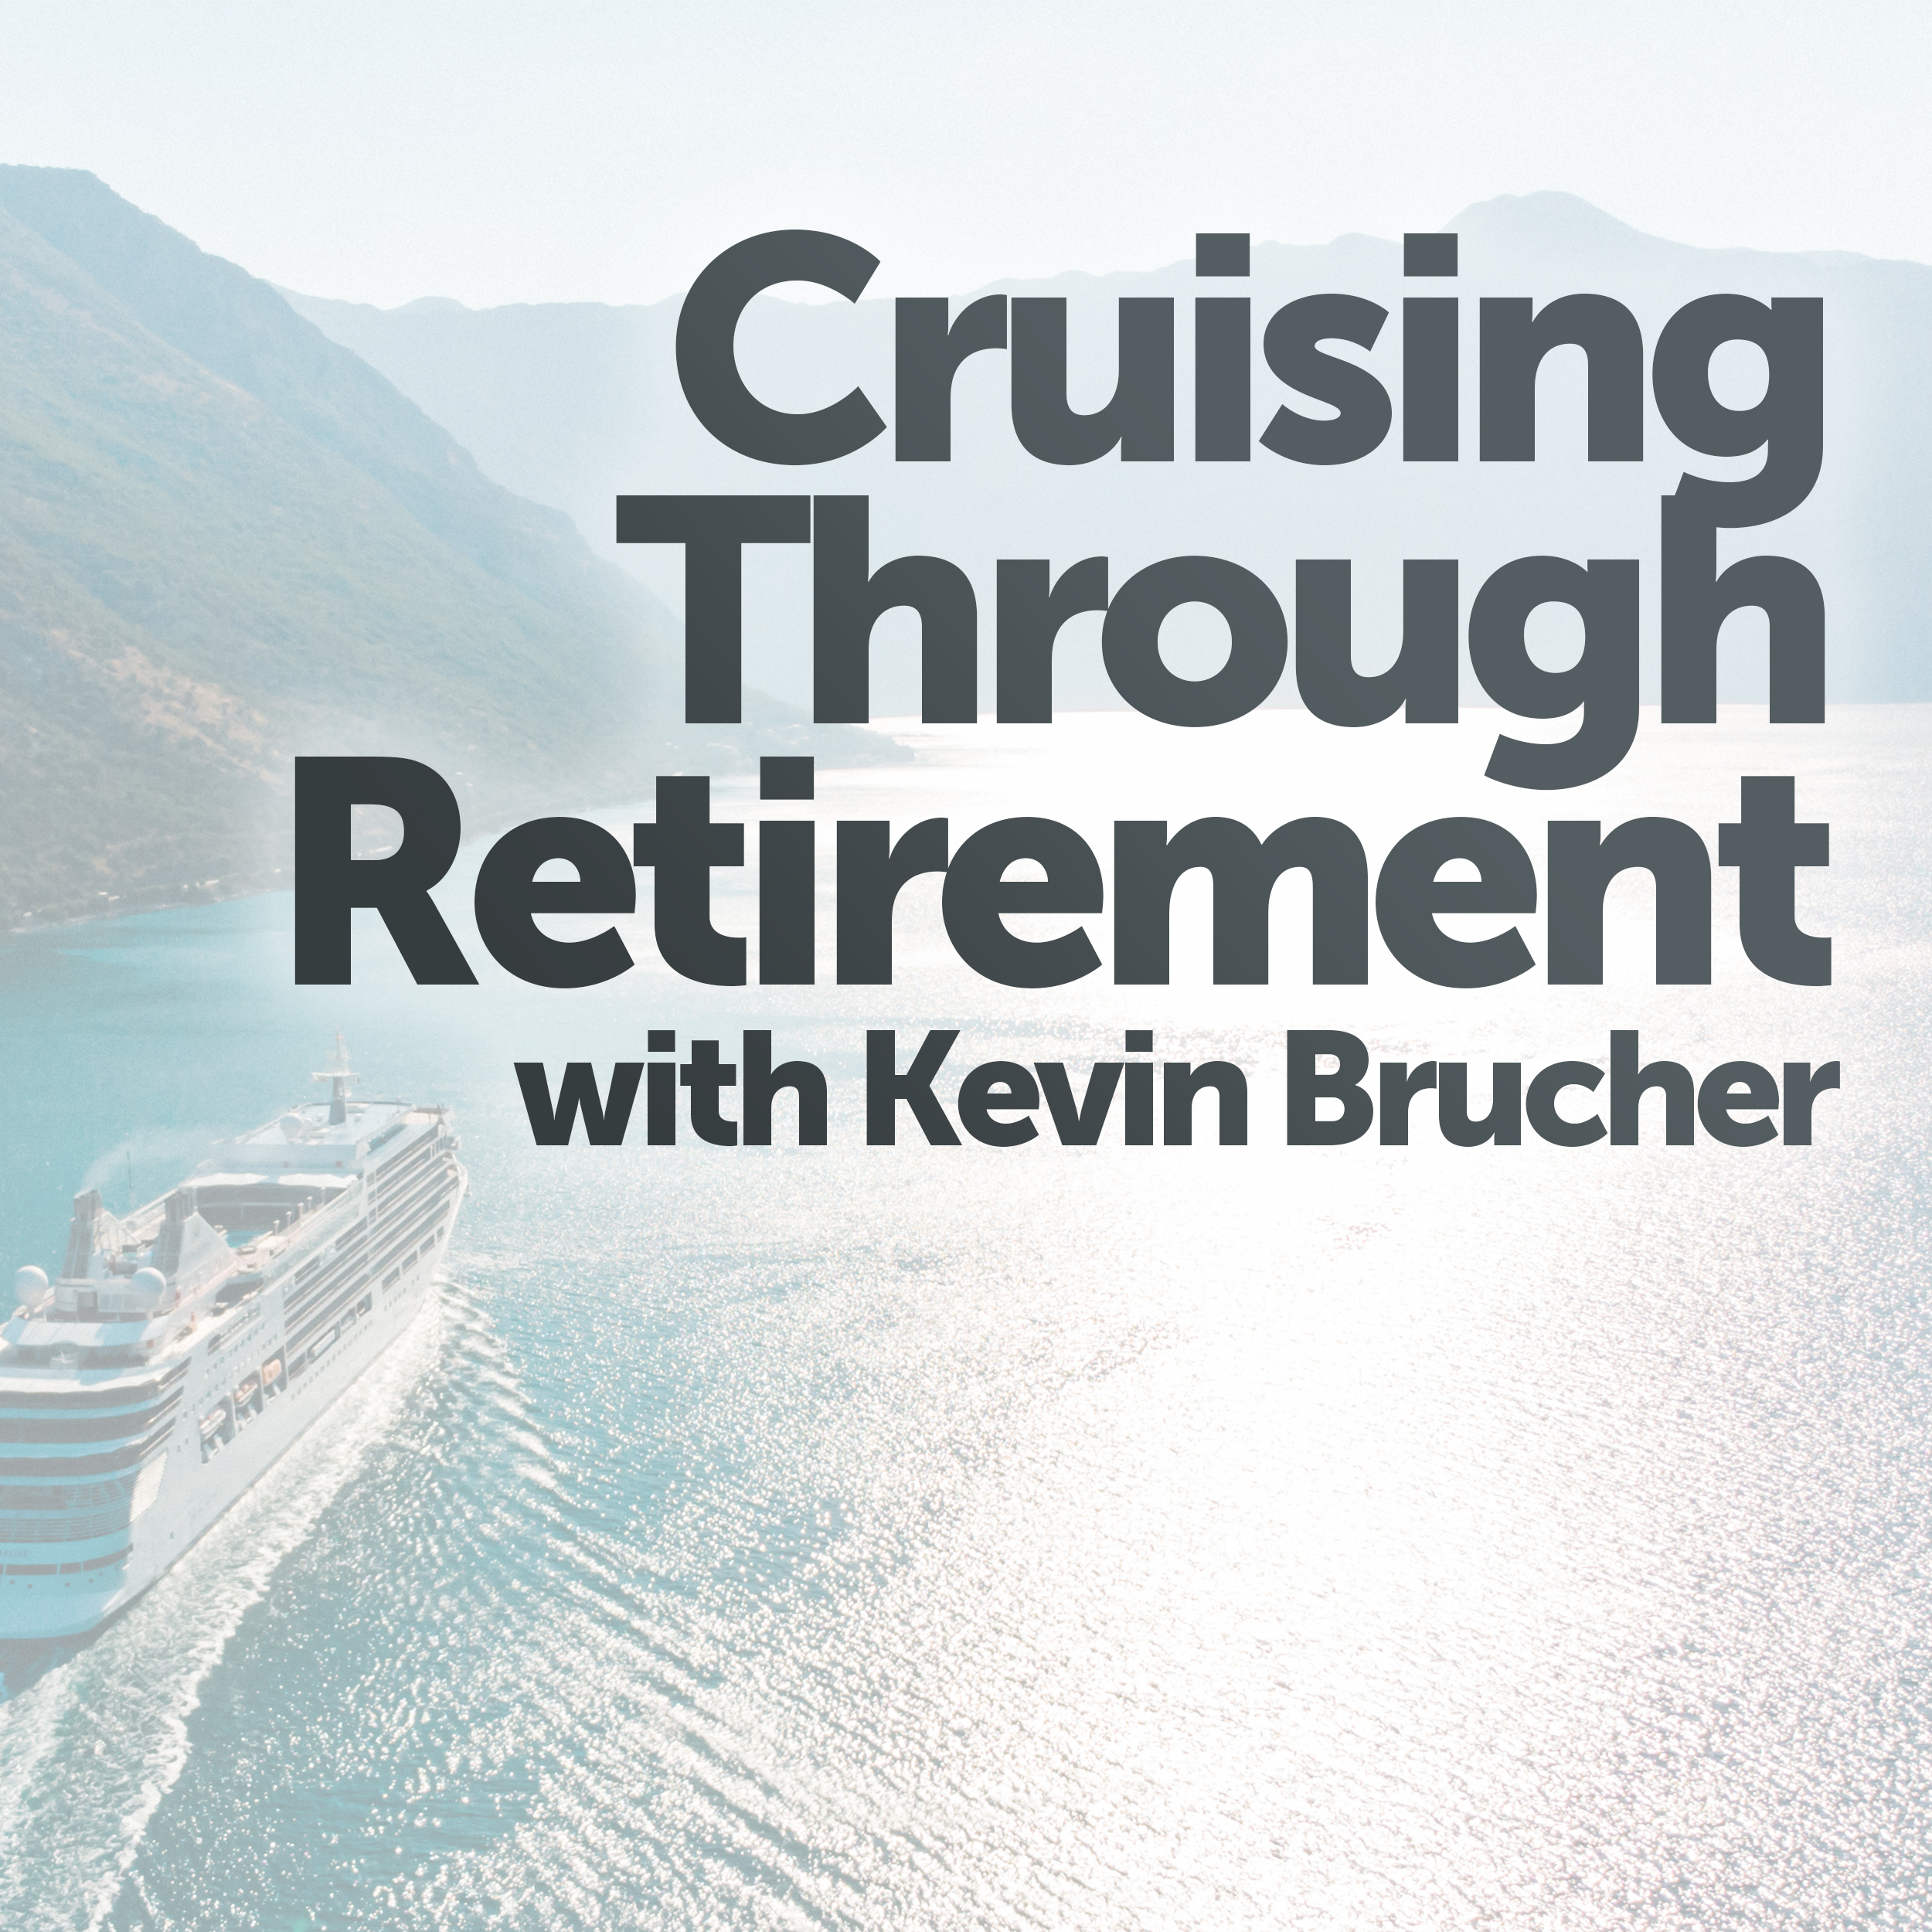 Cruising Through Retirement For those in the financial red zone approaching retirement, these economic conditions could change the trajectory of their retirement.